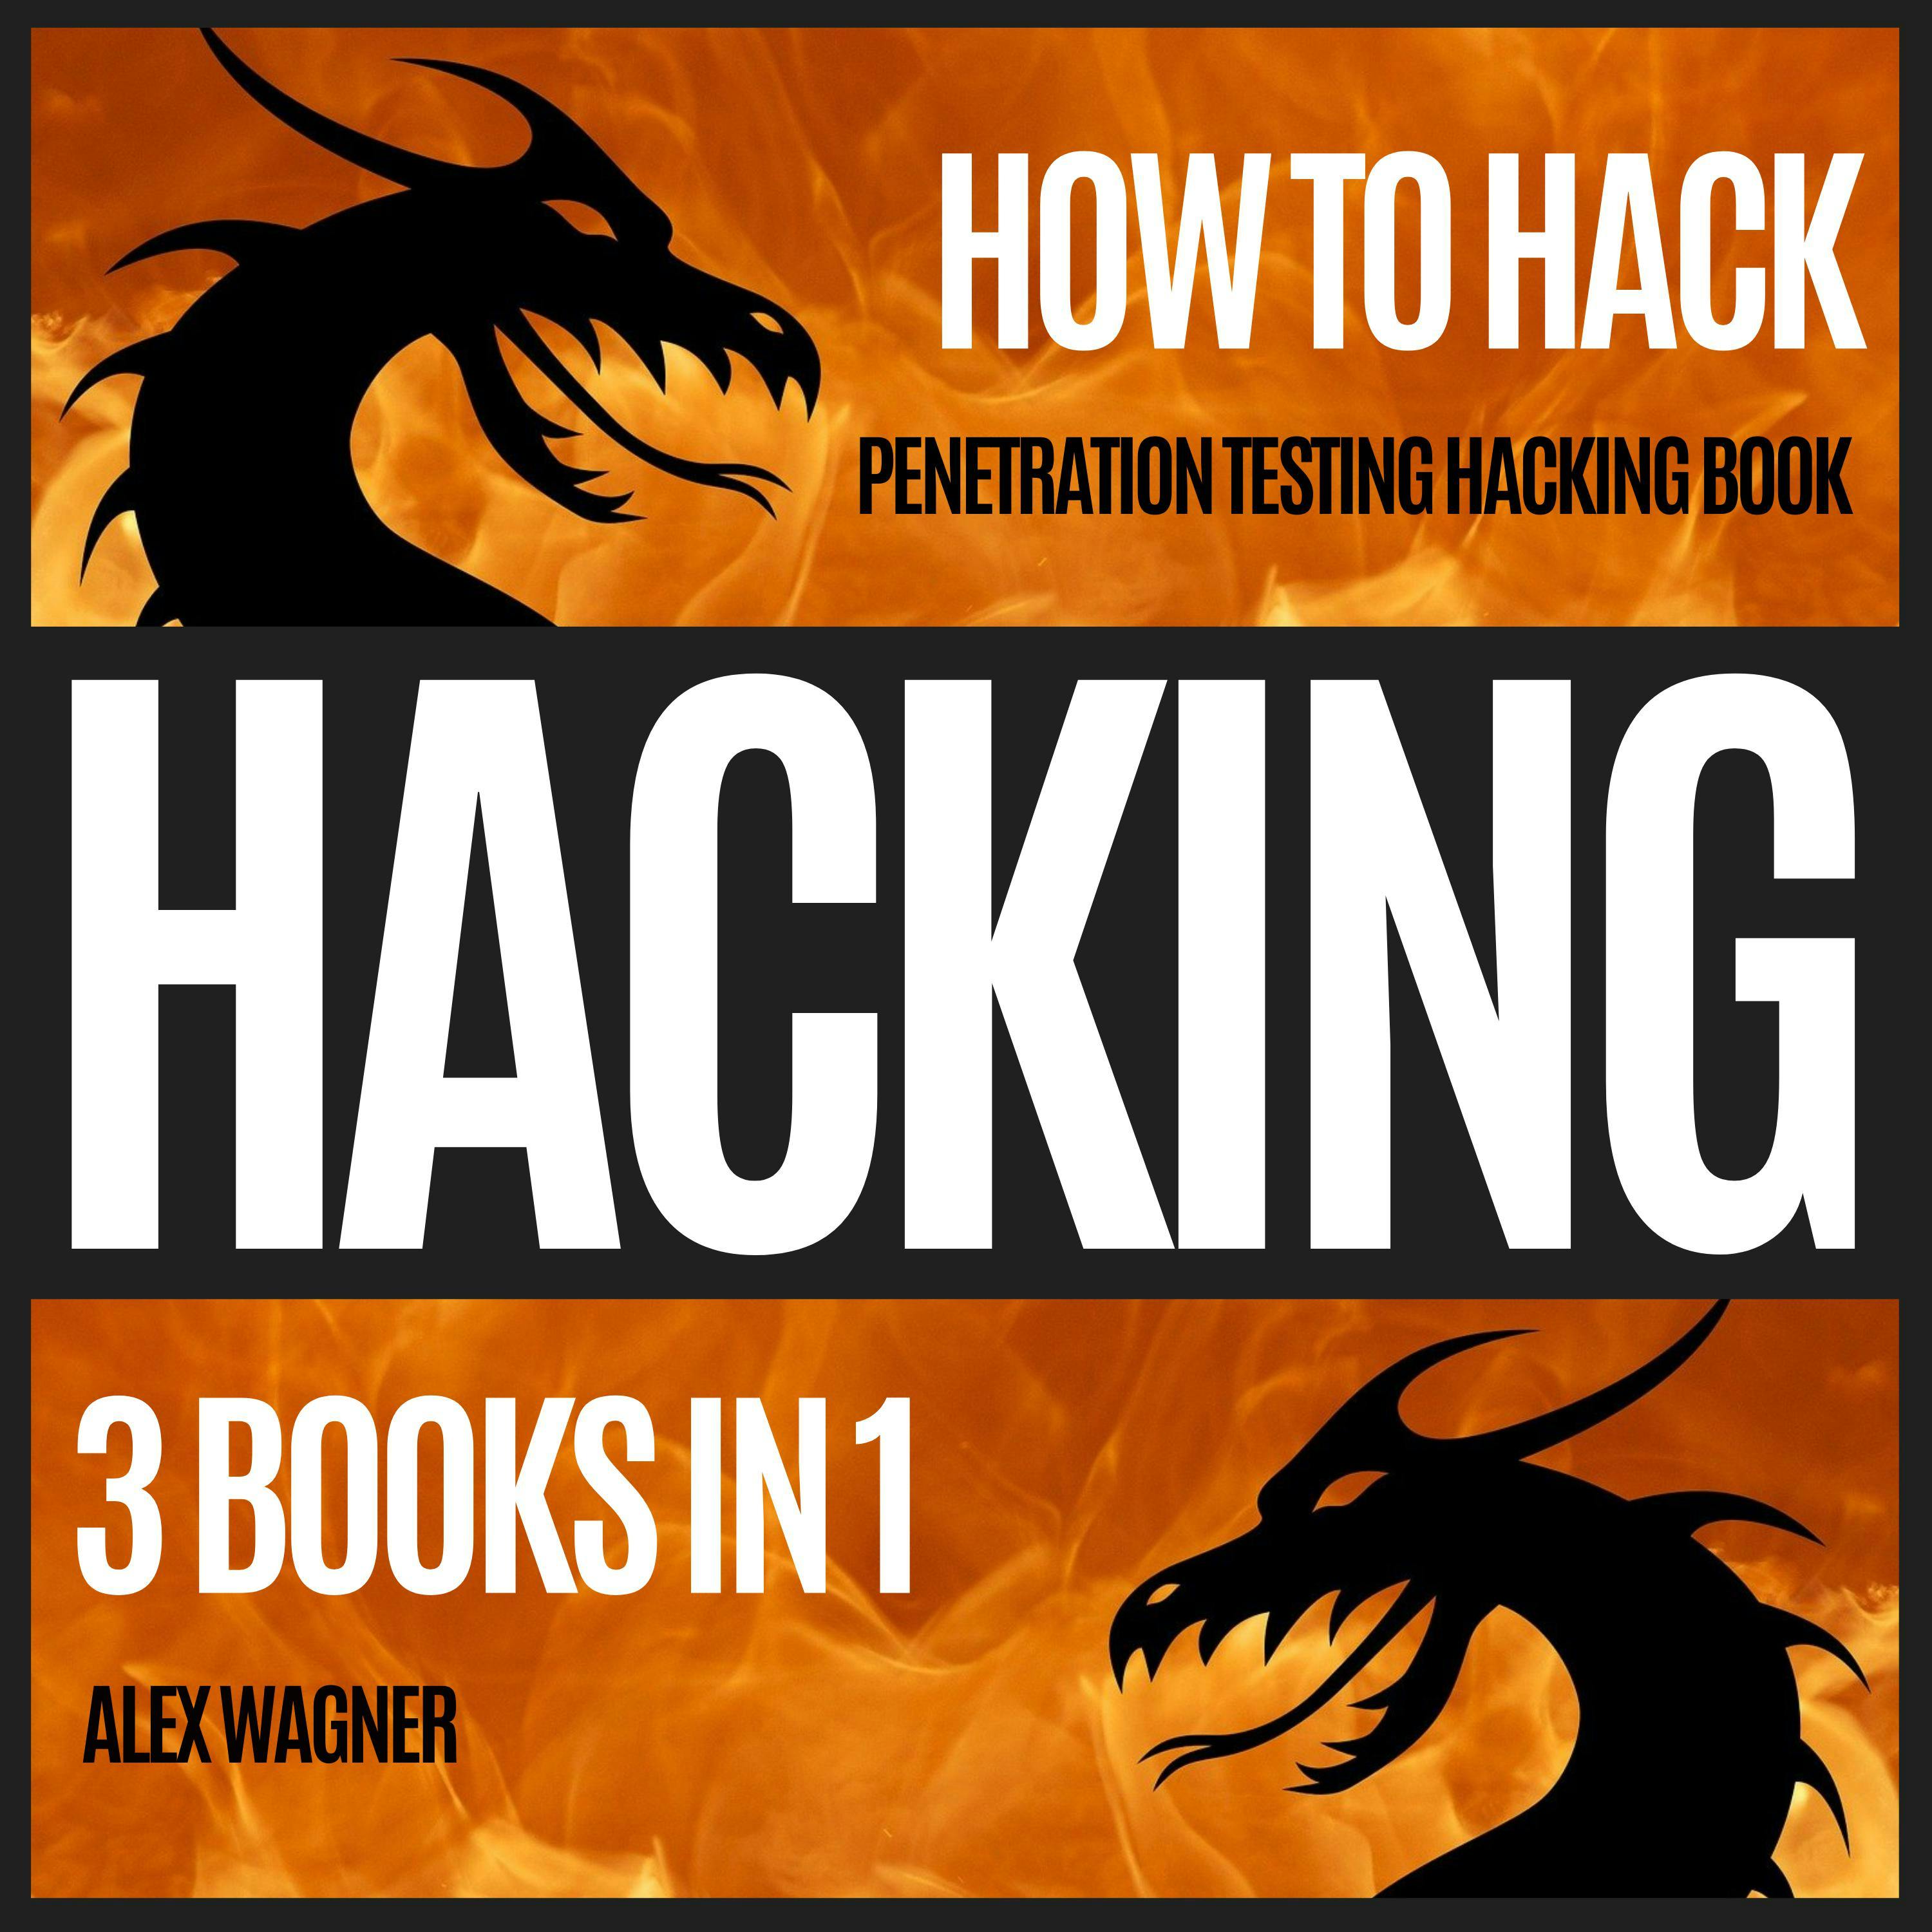 HACKING: HOW TO HACK: PENETRATION TESTING HACKING BOOK | 3 BOOKS IN 1 - Alex Wagner